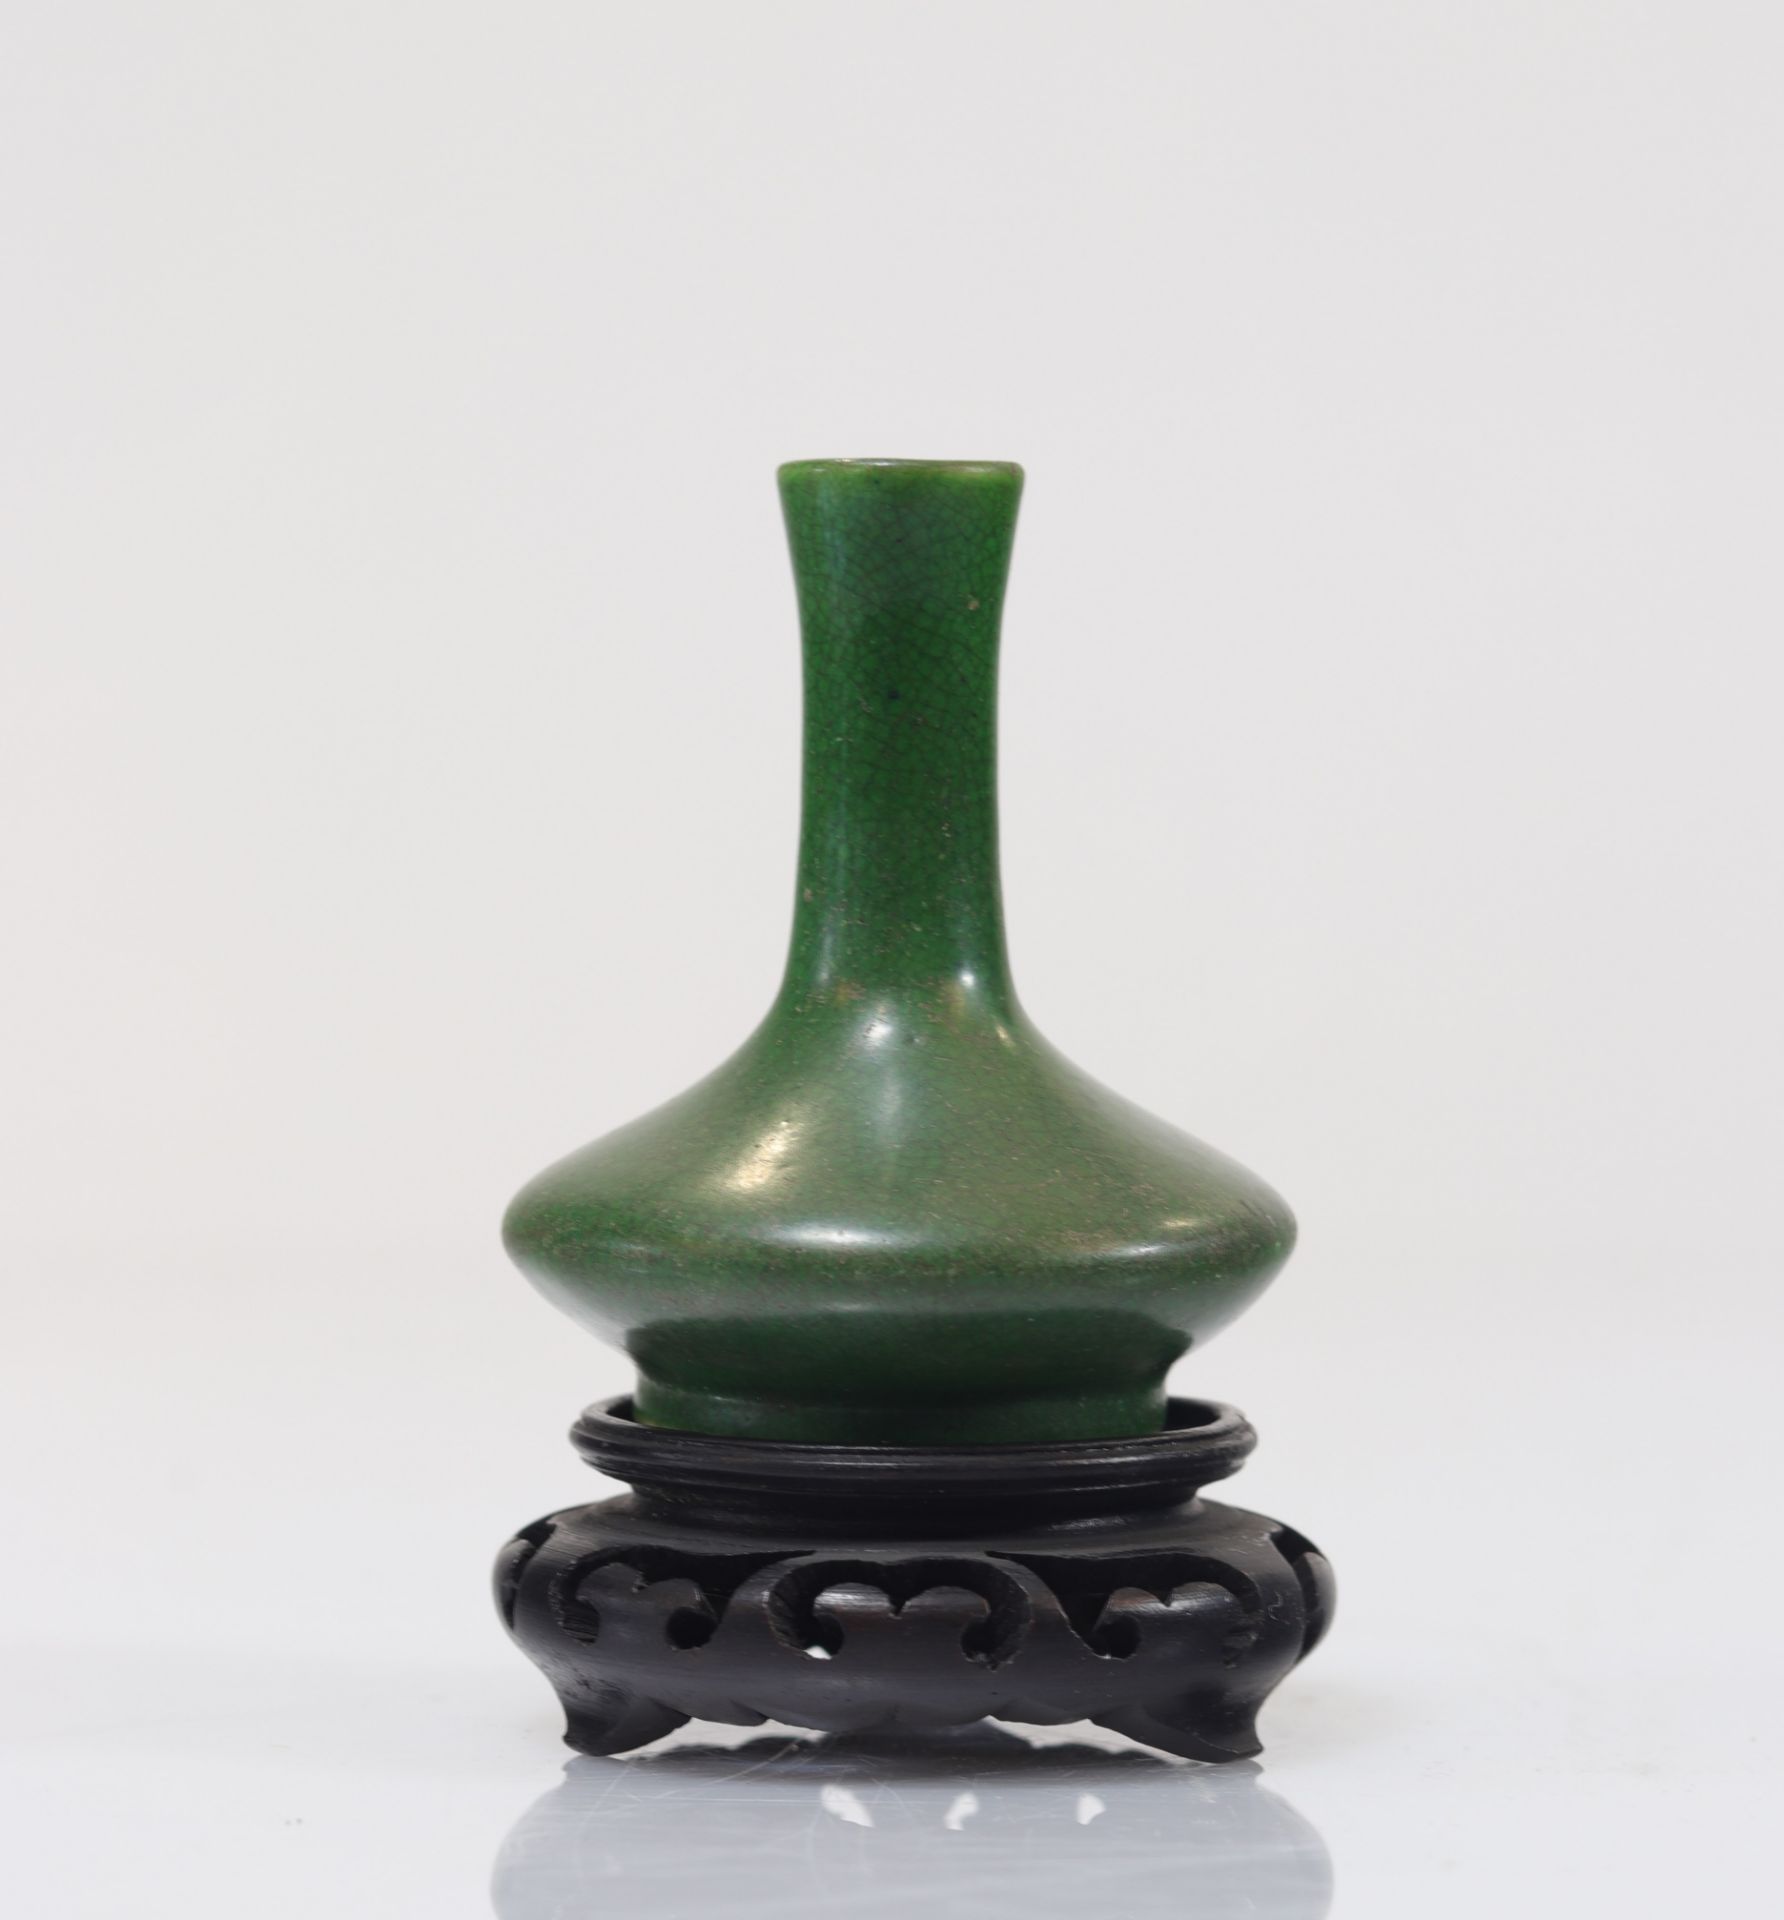 Qing Period Green Monochrome Porcelain Vase - Image 3 of 4